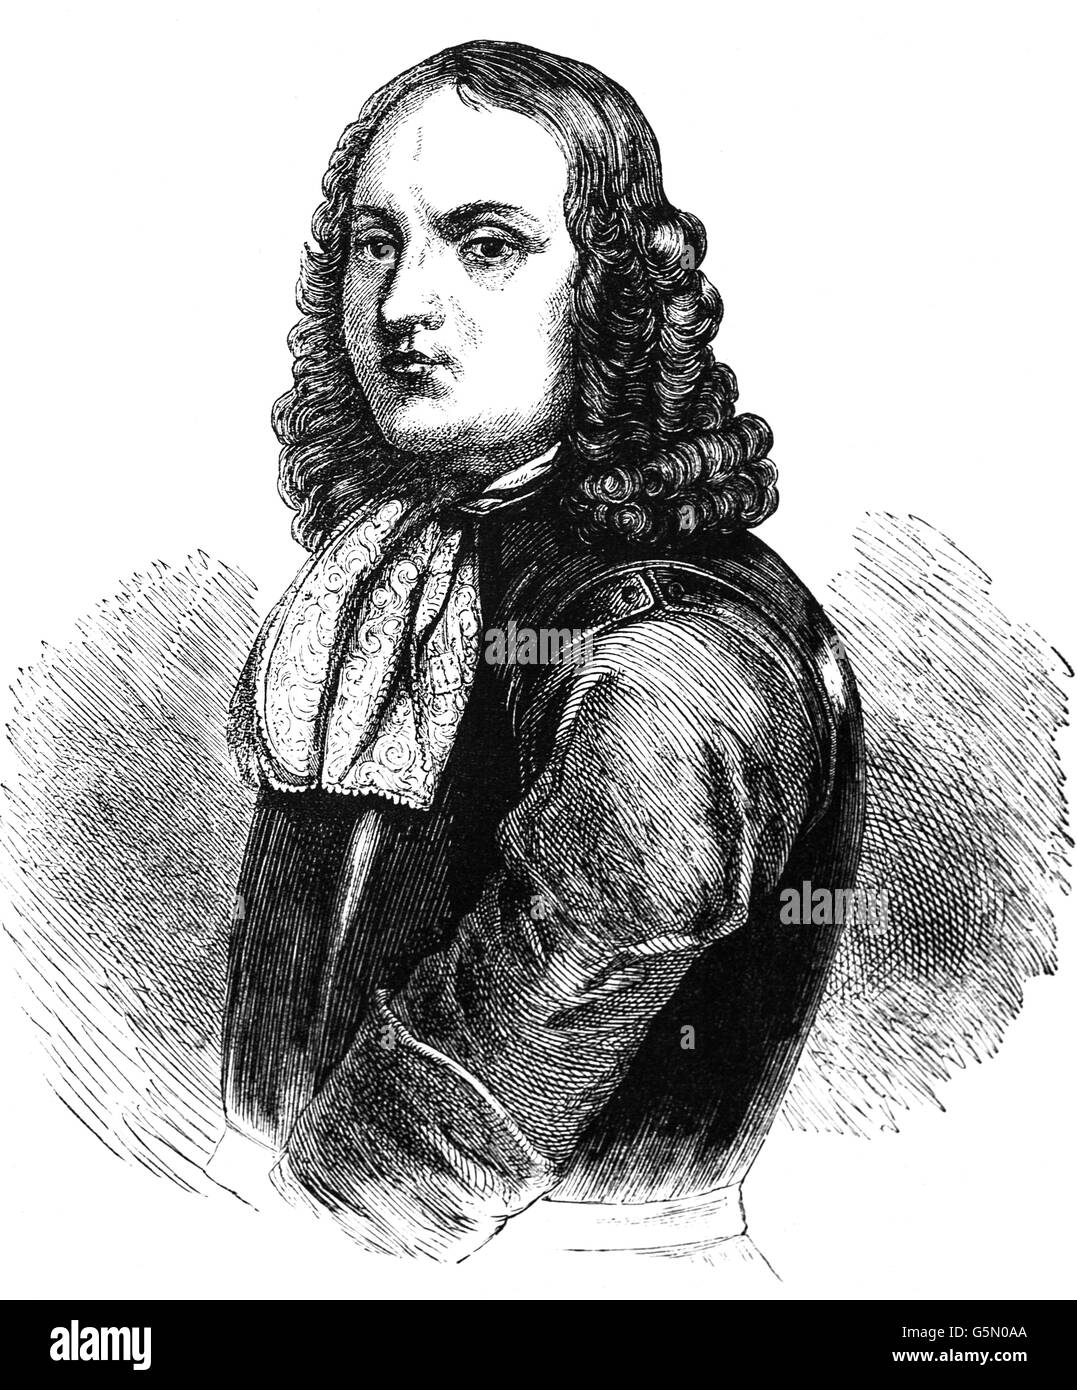 Robert Blake (1598 – 1657) was one of the most important military commanders of the Commonwealth of England and one of the most famous English admirals of the 17th century.  Elected as the Member of Parliament for Bridgewater in the Short Parliament.  When the English Civil War broke out Blake began his military career on the side of the parliamentarians. Stock Photo